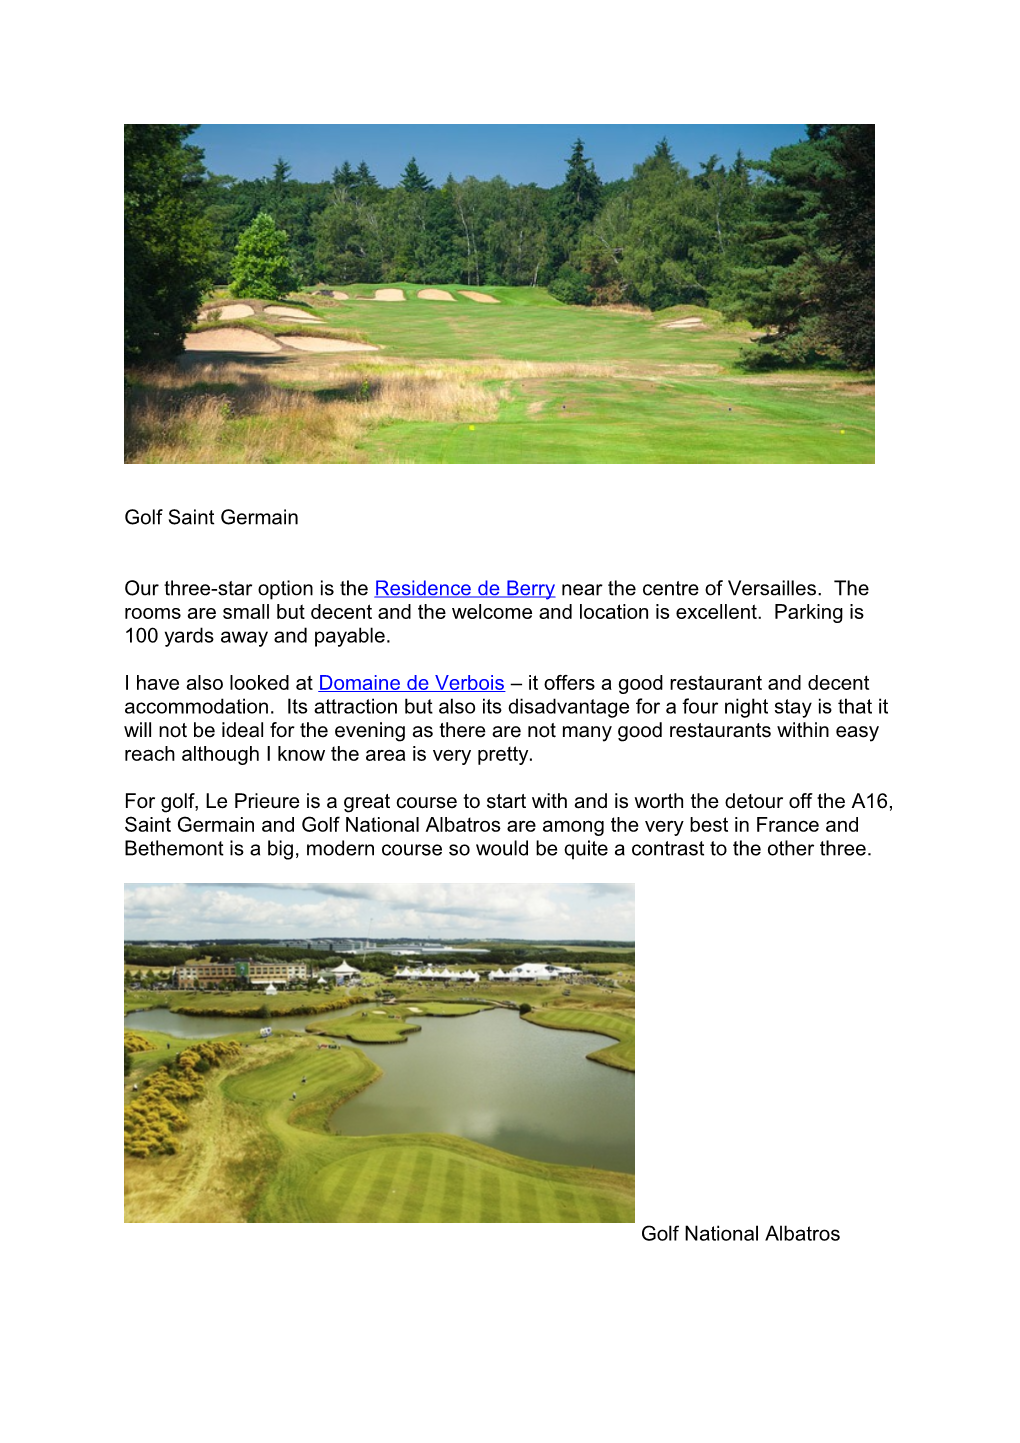 I Am Pleased to Provide My Recommendations and Prices for Your Versailles Golf Holiday